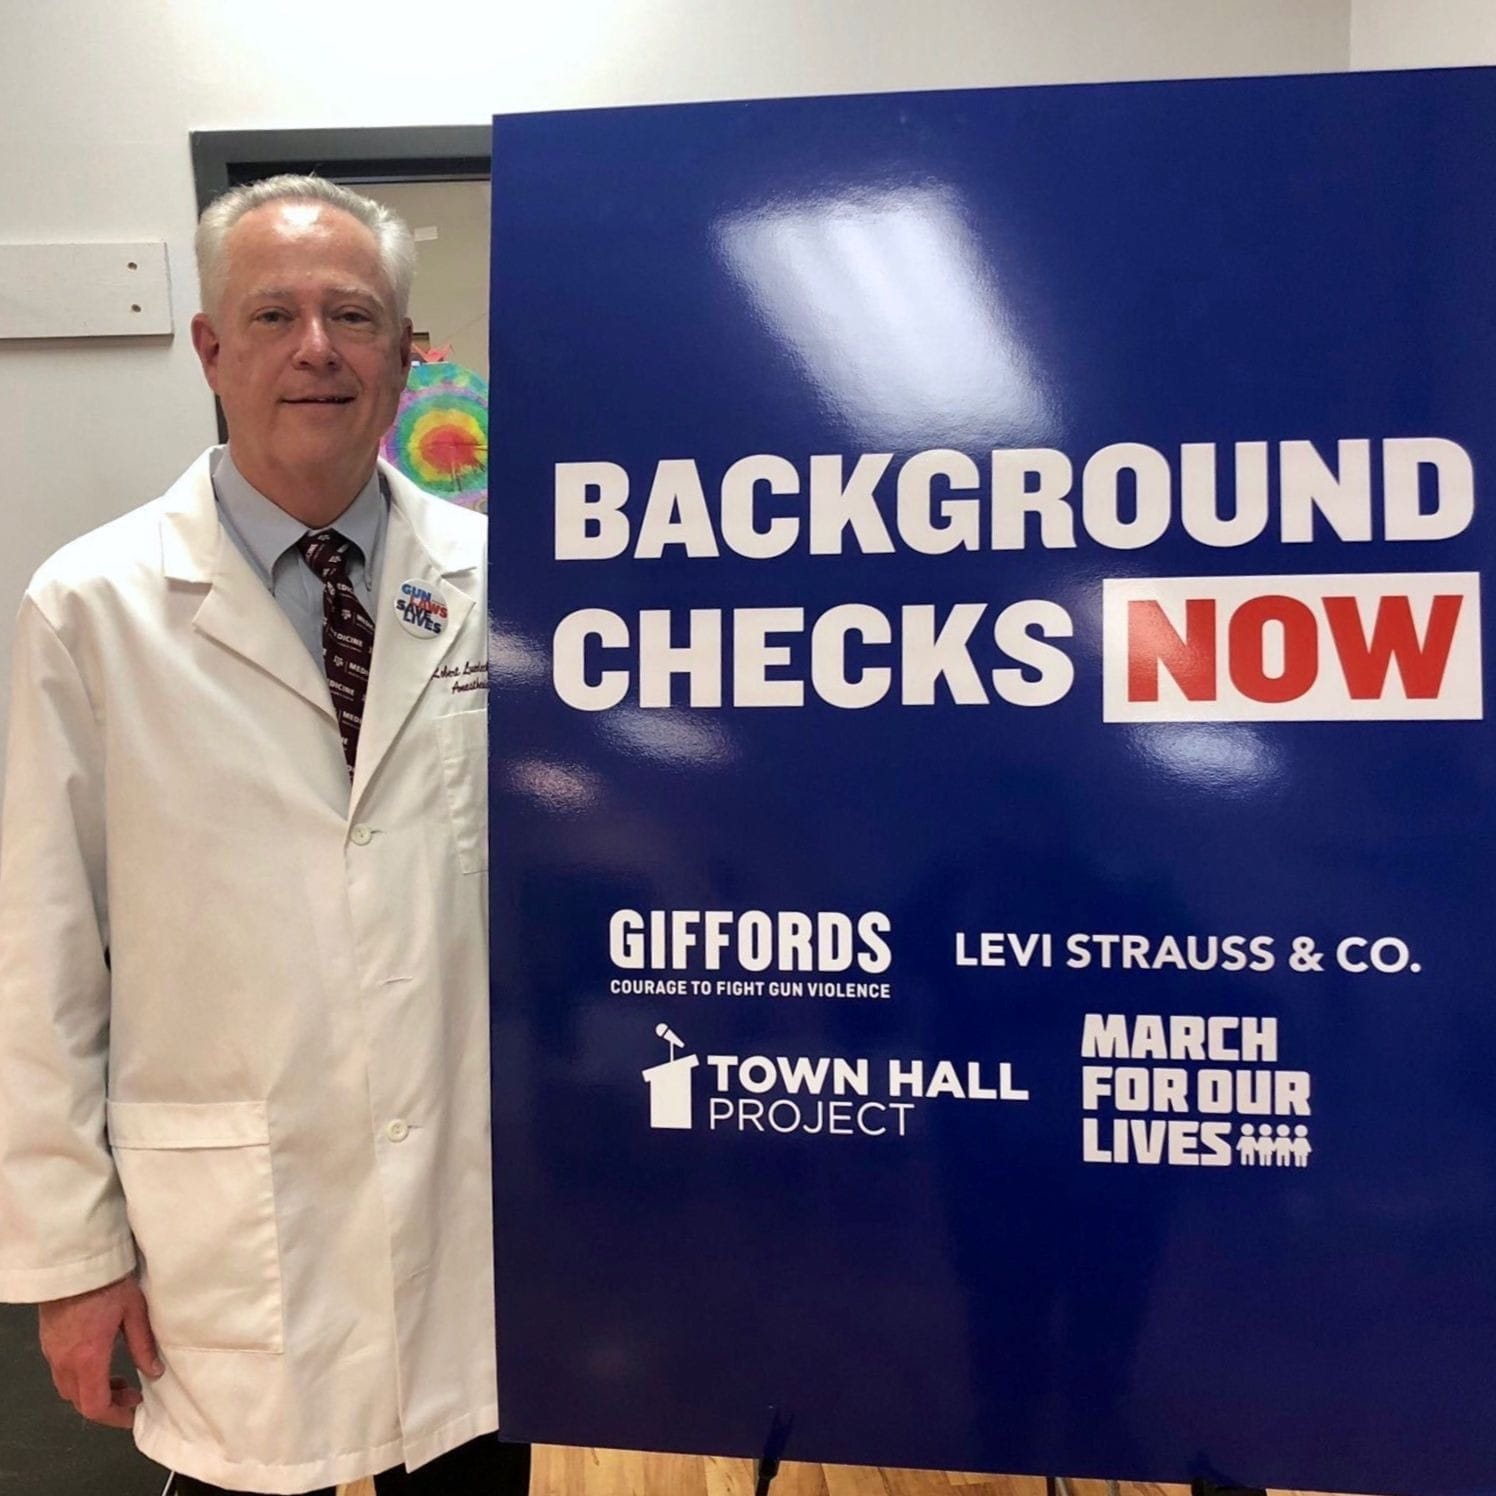 Dr. Robert Luedecke joined the Austin Town Hall to call on Congress to pass universal background checks.